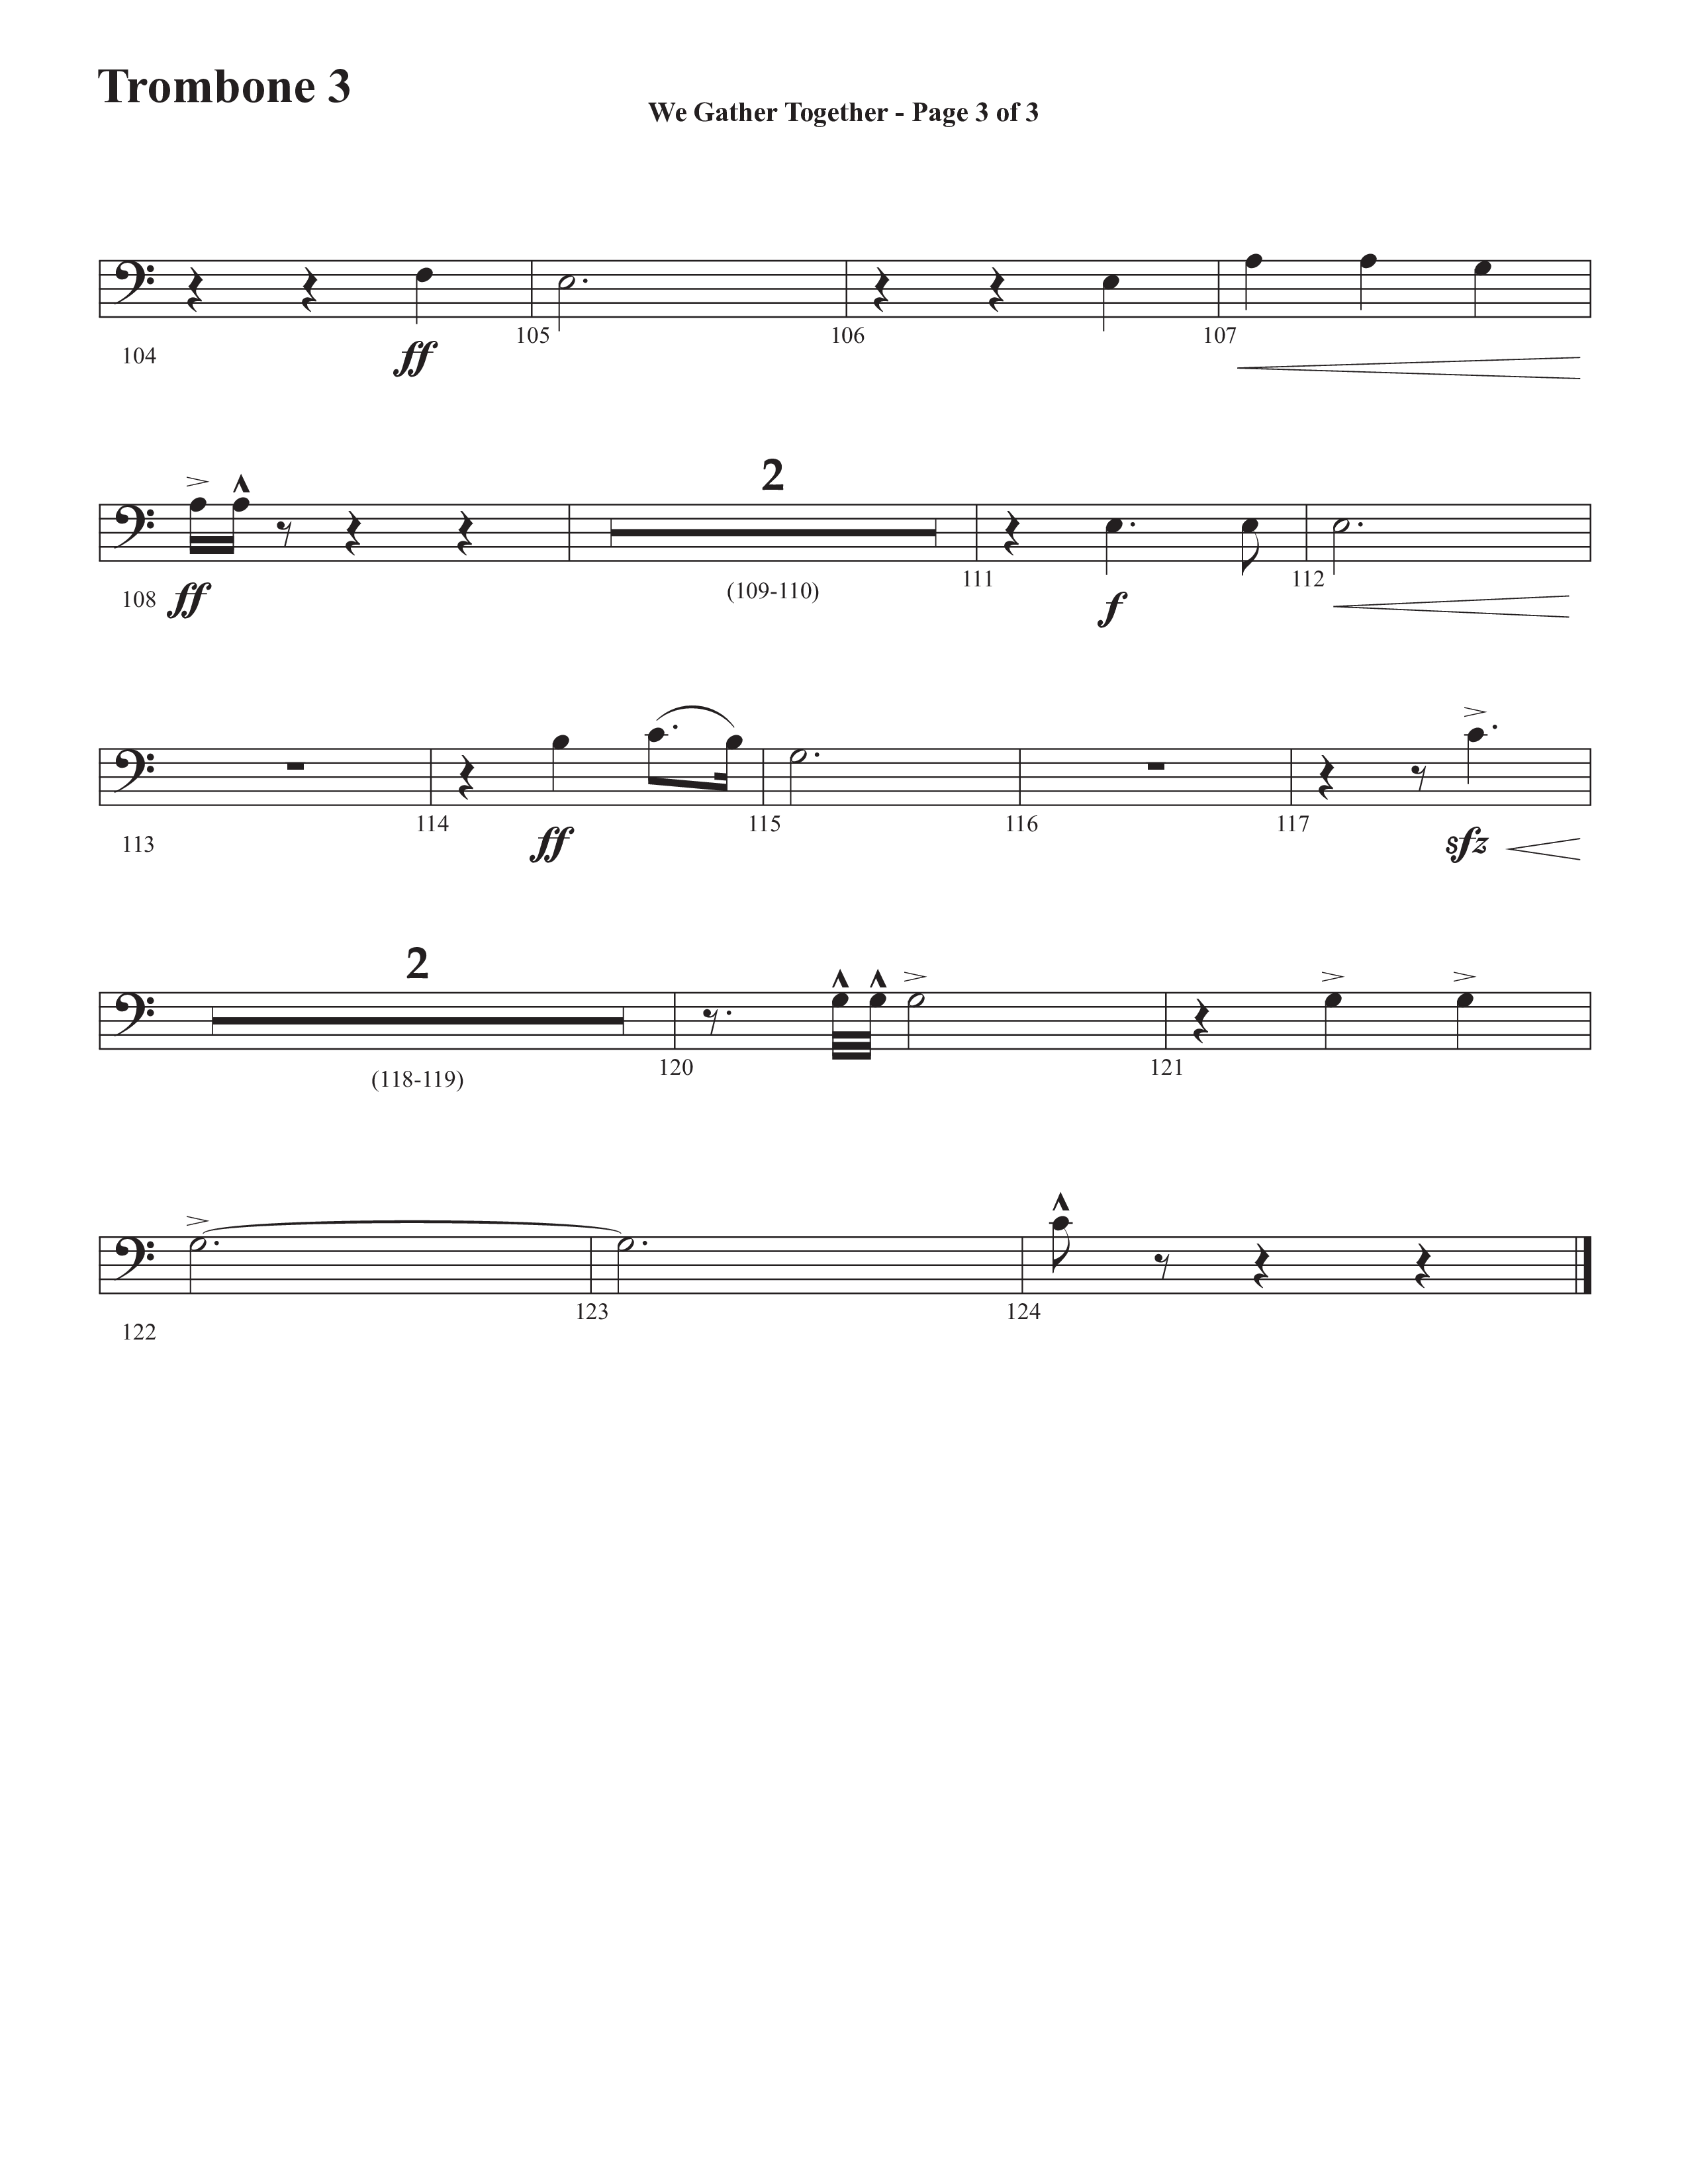 We Gather Together (We Thank You) (Choral Anthem SATB) Trombone 3 (Semsen Music / Arr. John Bolin / Orch. Cliff Duren)